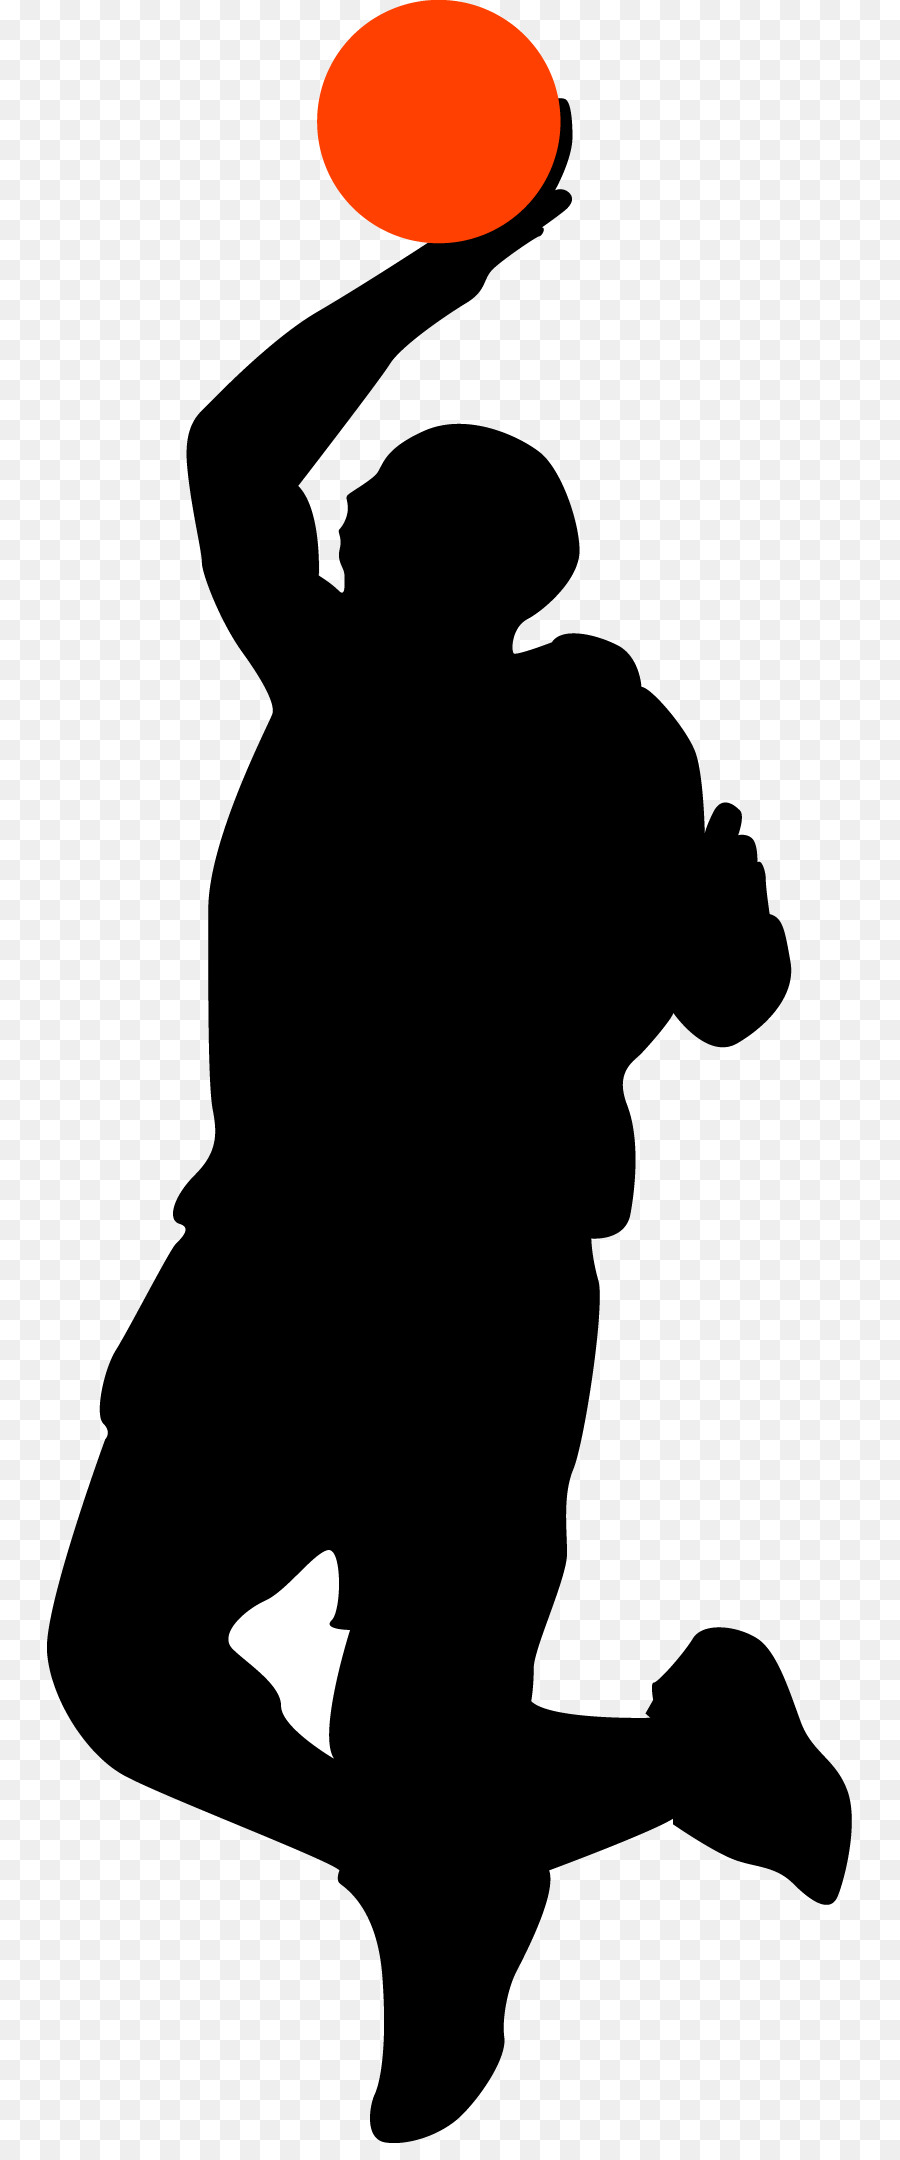 Basketball Trivia Basketball player Silhouette - Vector character figure of basketball player png download - 805*2143 - Free Transparent Basketball Trivia png Download.